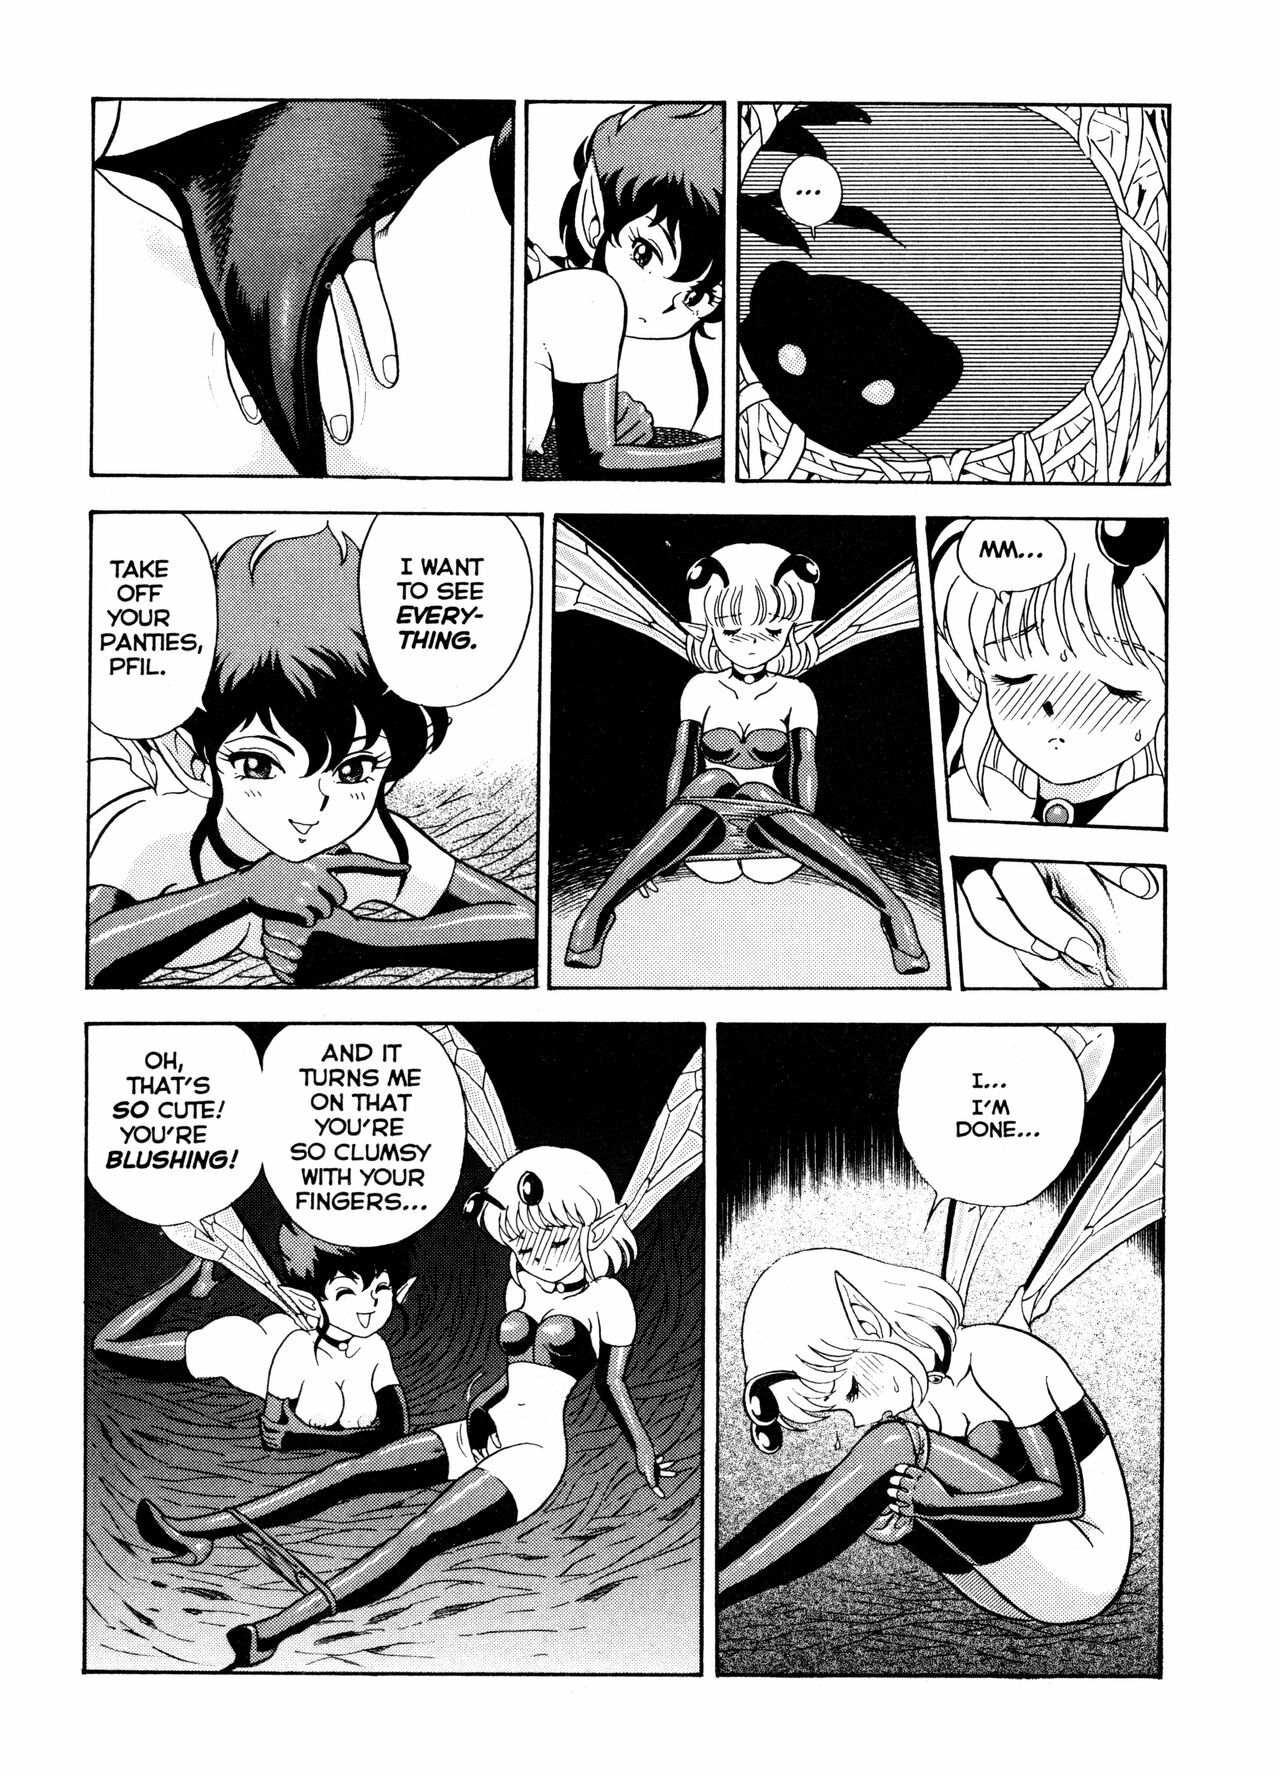 [Kondom] The New Bondage Fairies Issue 15 [ENG][Hi-Res] page 10 full